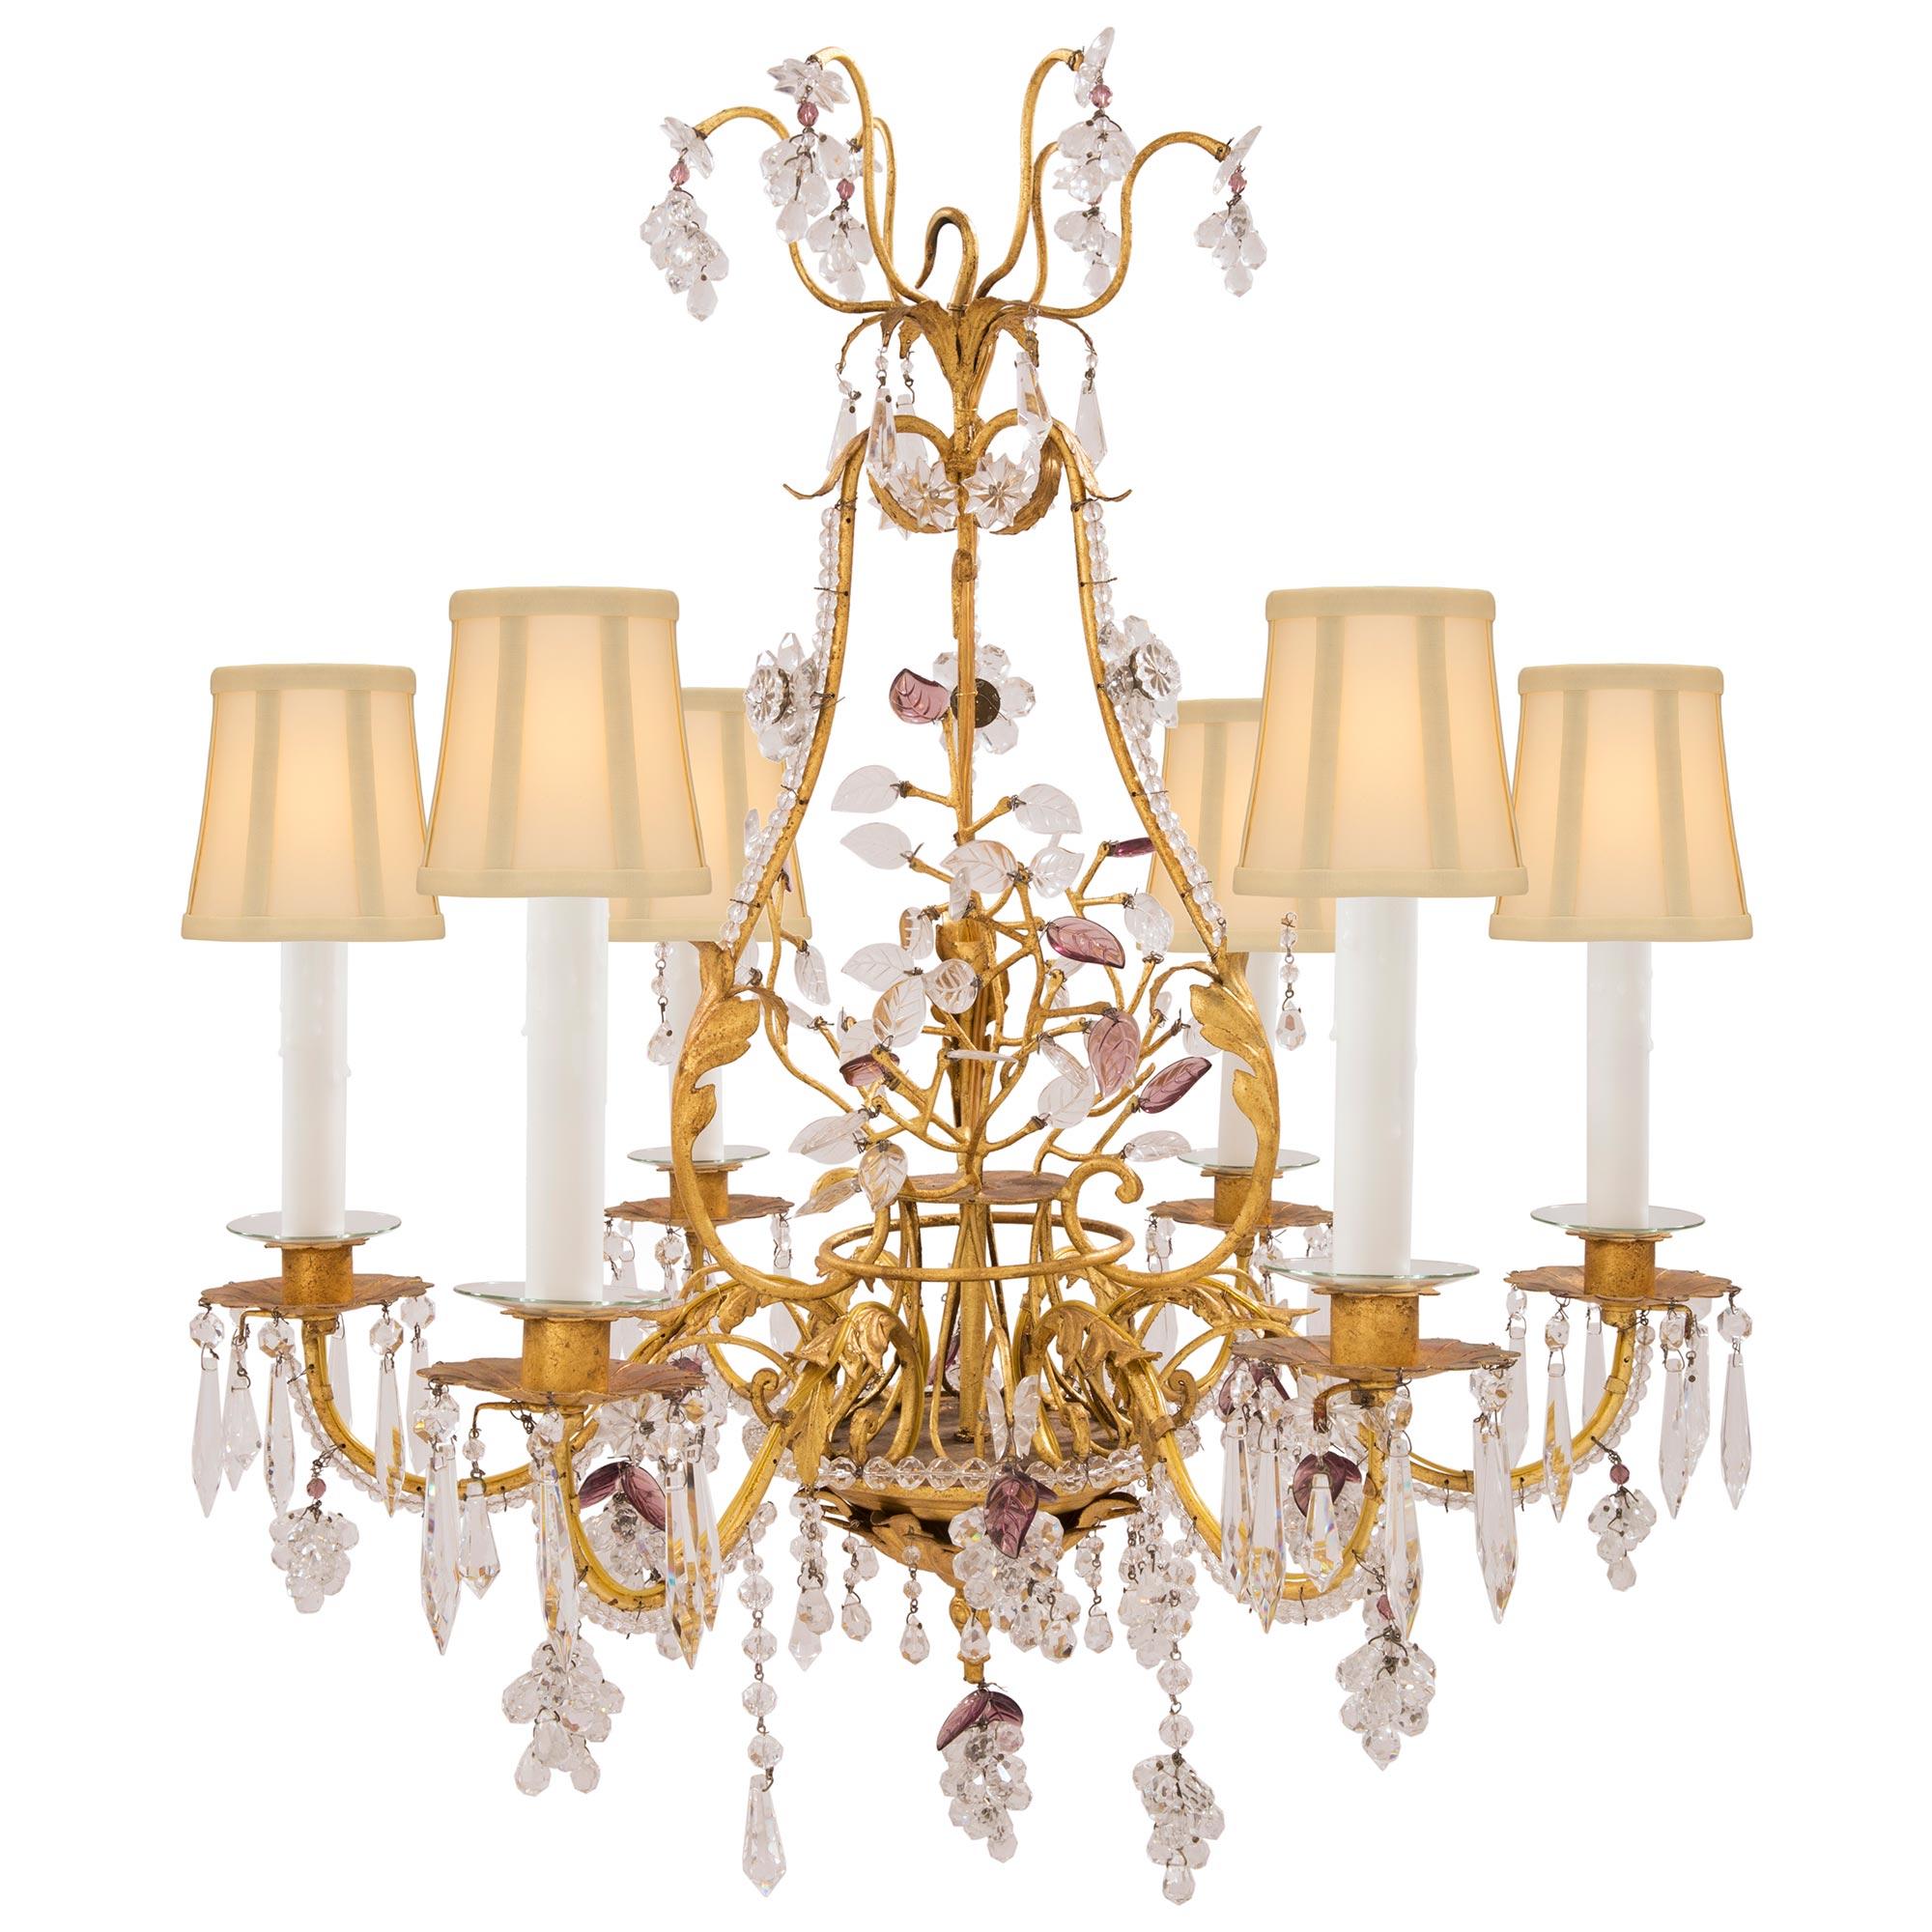 An exceptional pair of French 19th century Louis XV st. gilt metal, Baccarat crystal and cut glass chandeliers, attributed to Maison Bagues. Each of the six arm chandeliers is centered by a charming and most decorative bottom pendant with lovely